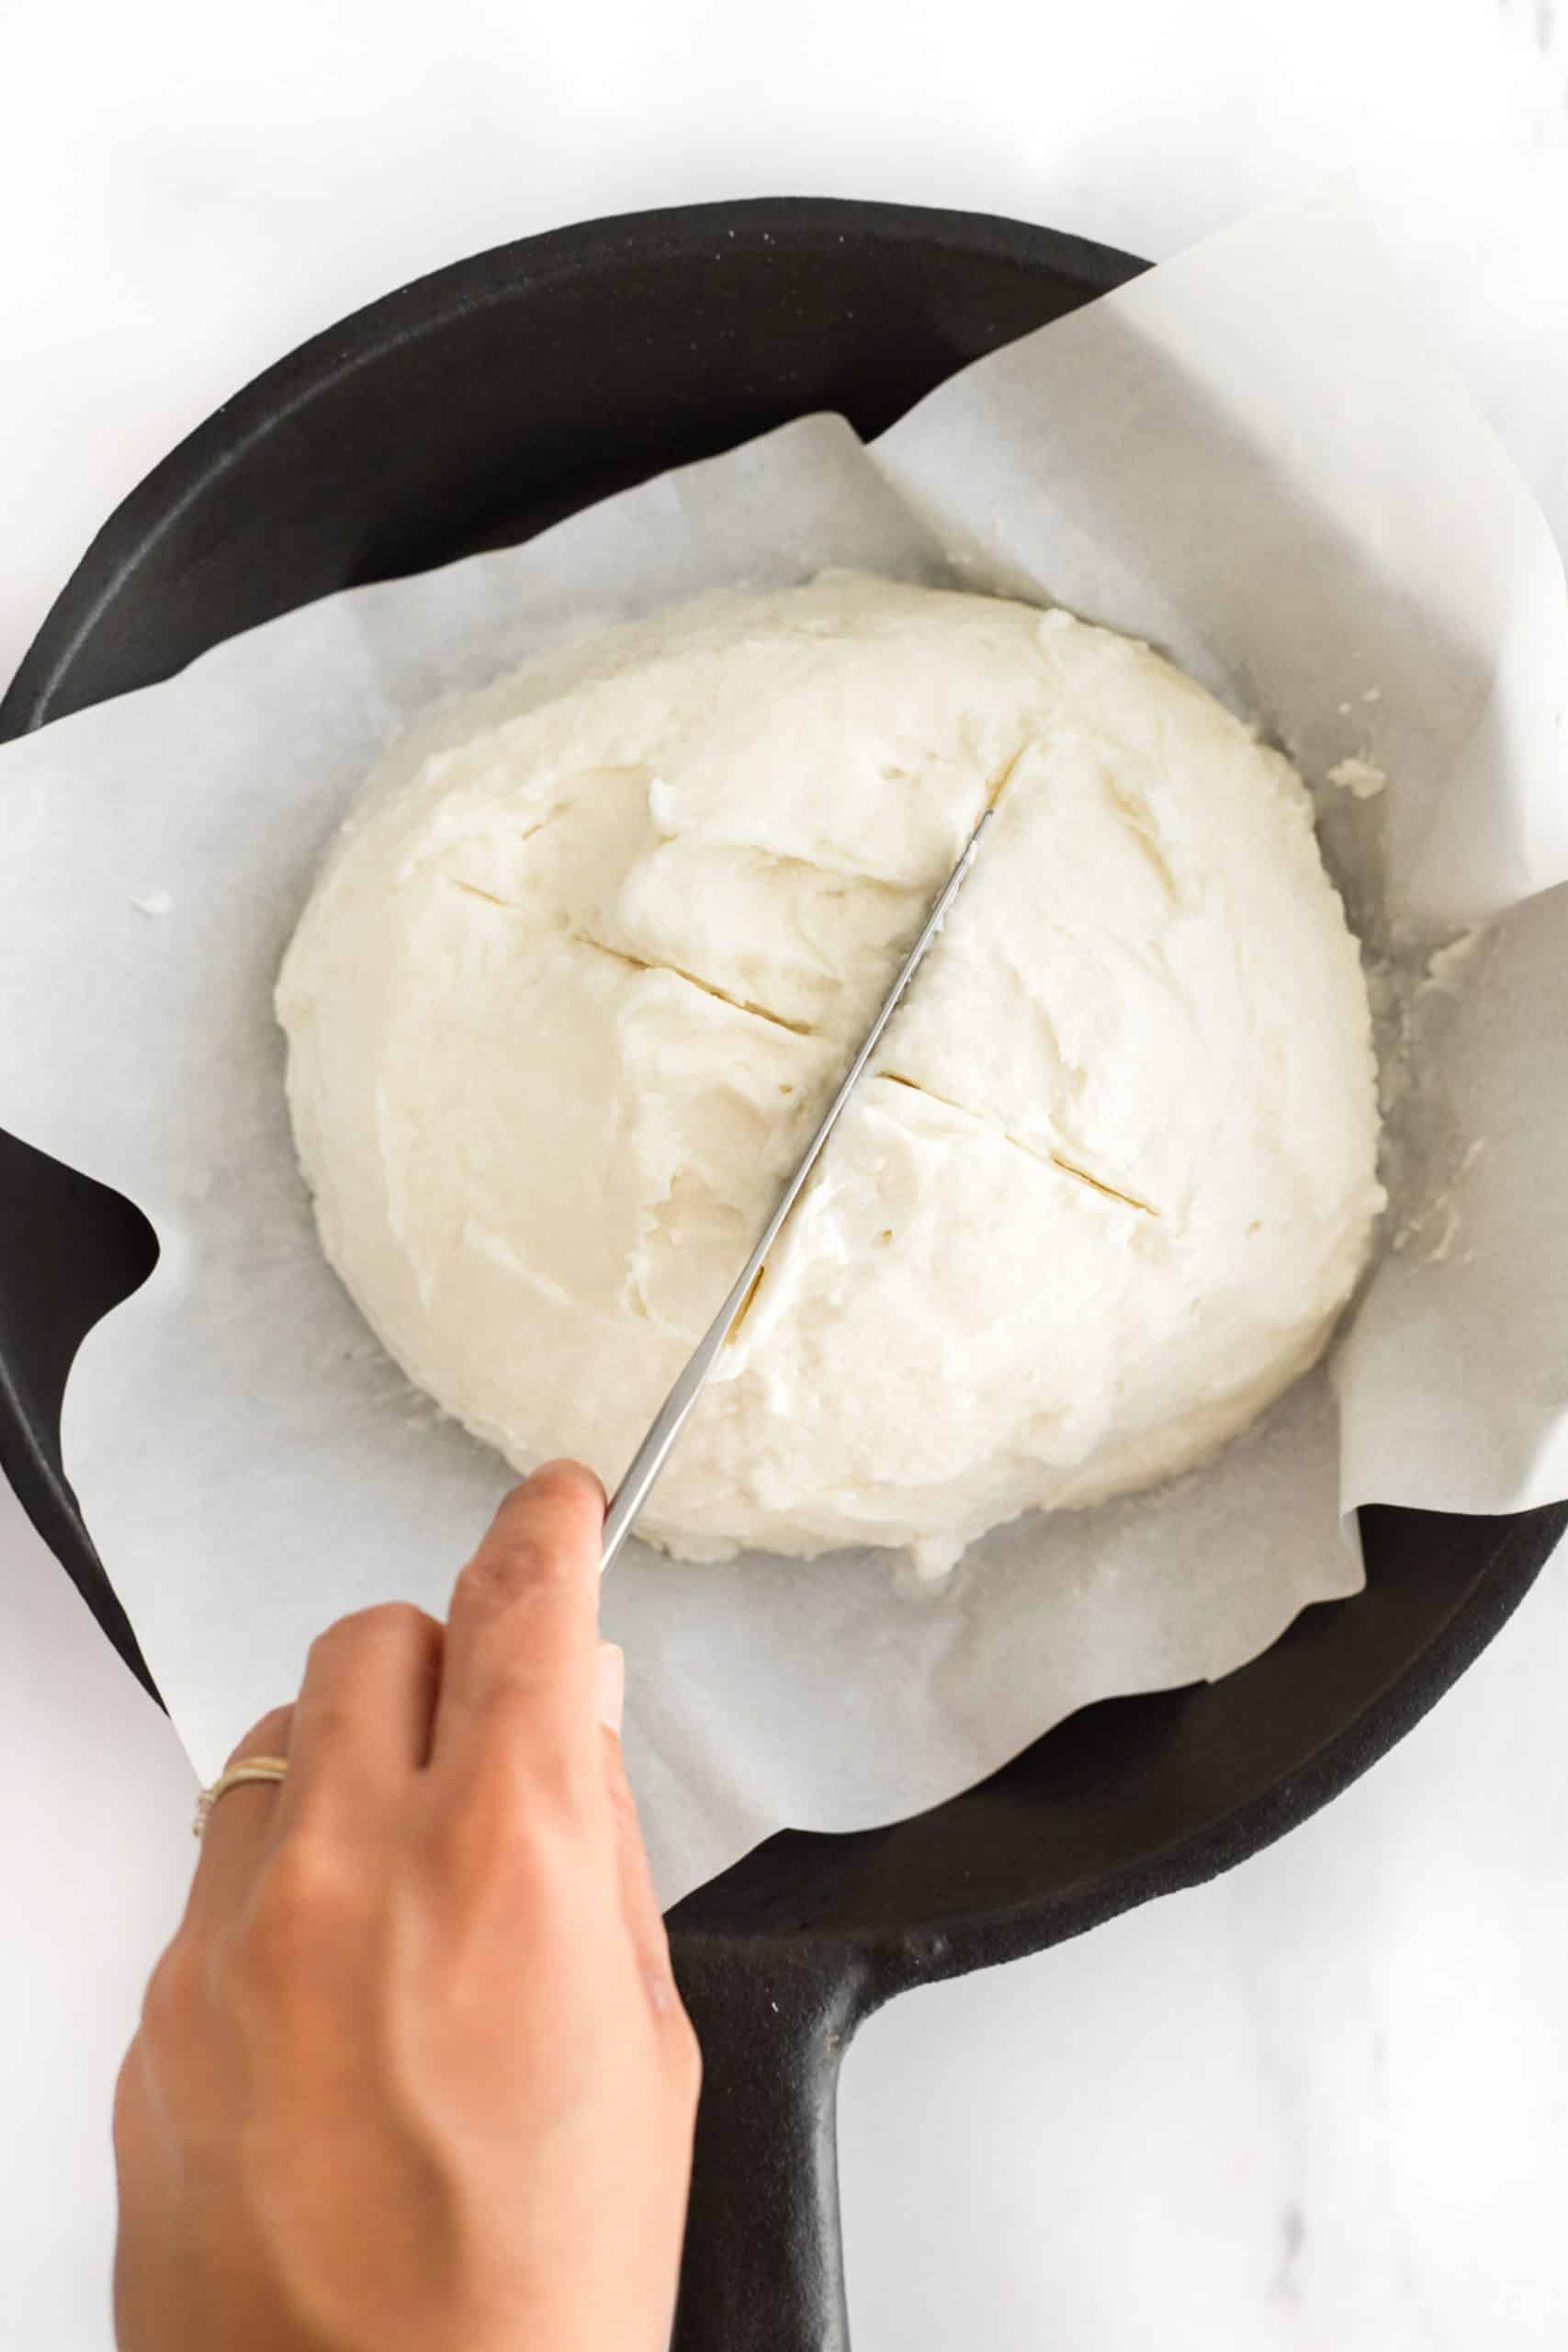 Using a knife to cut a cross on top of the bread dough.